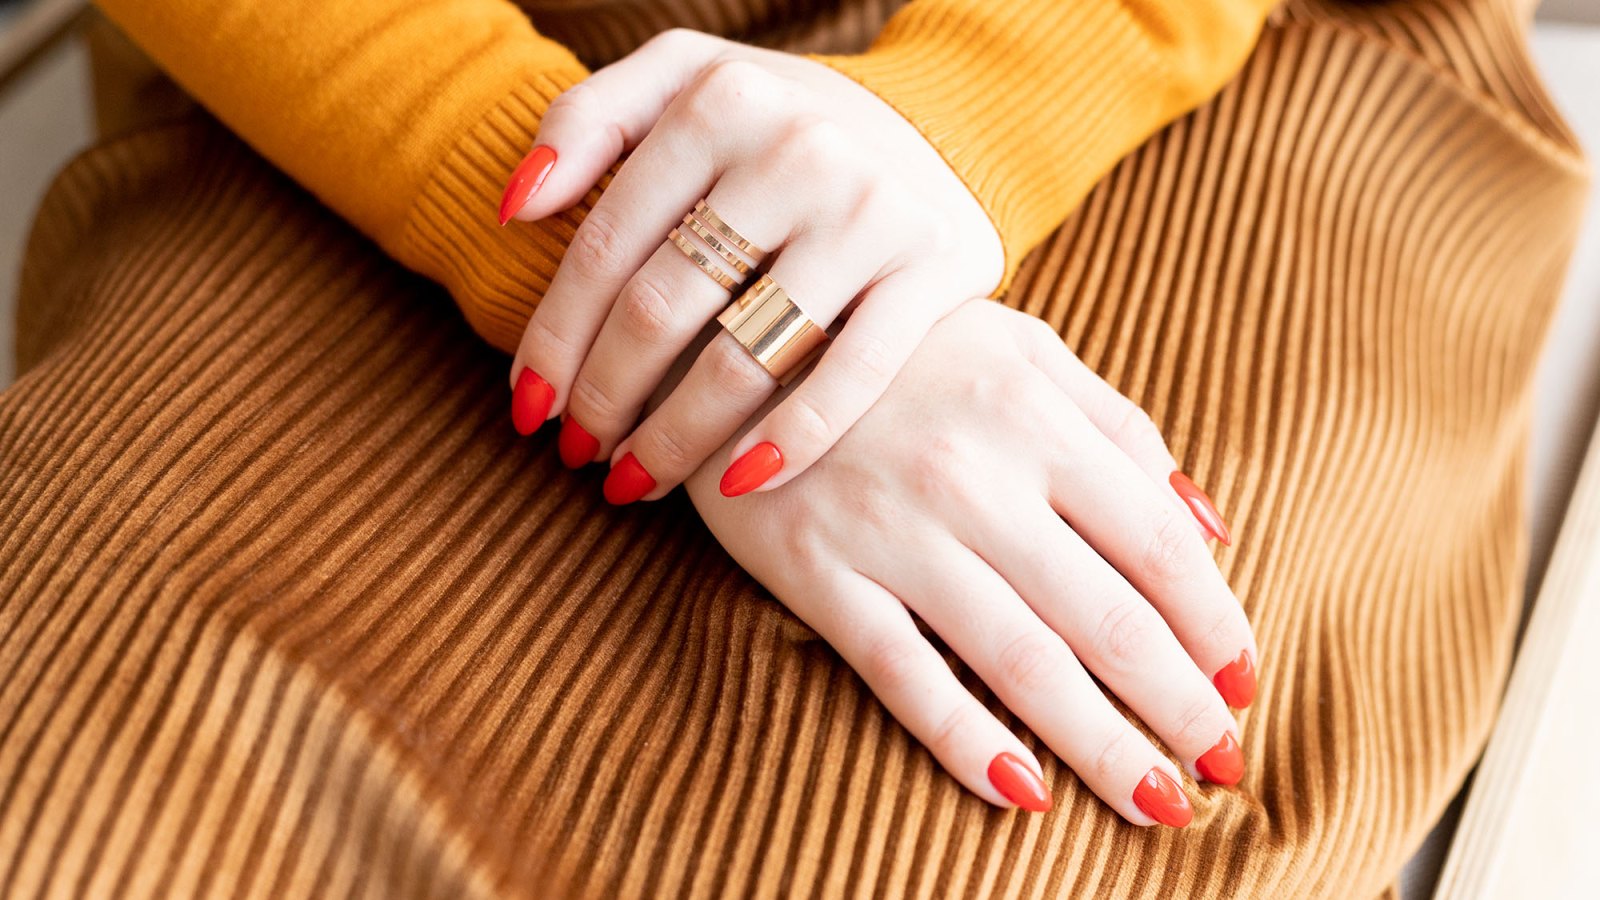 The Young woman's hands with Red manicure and gold rings are on her lap